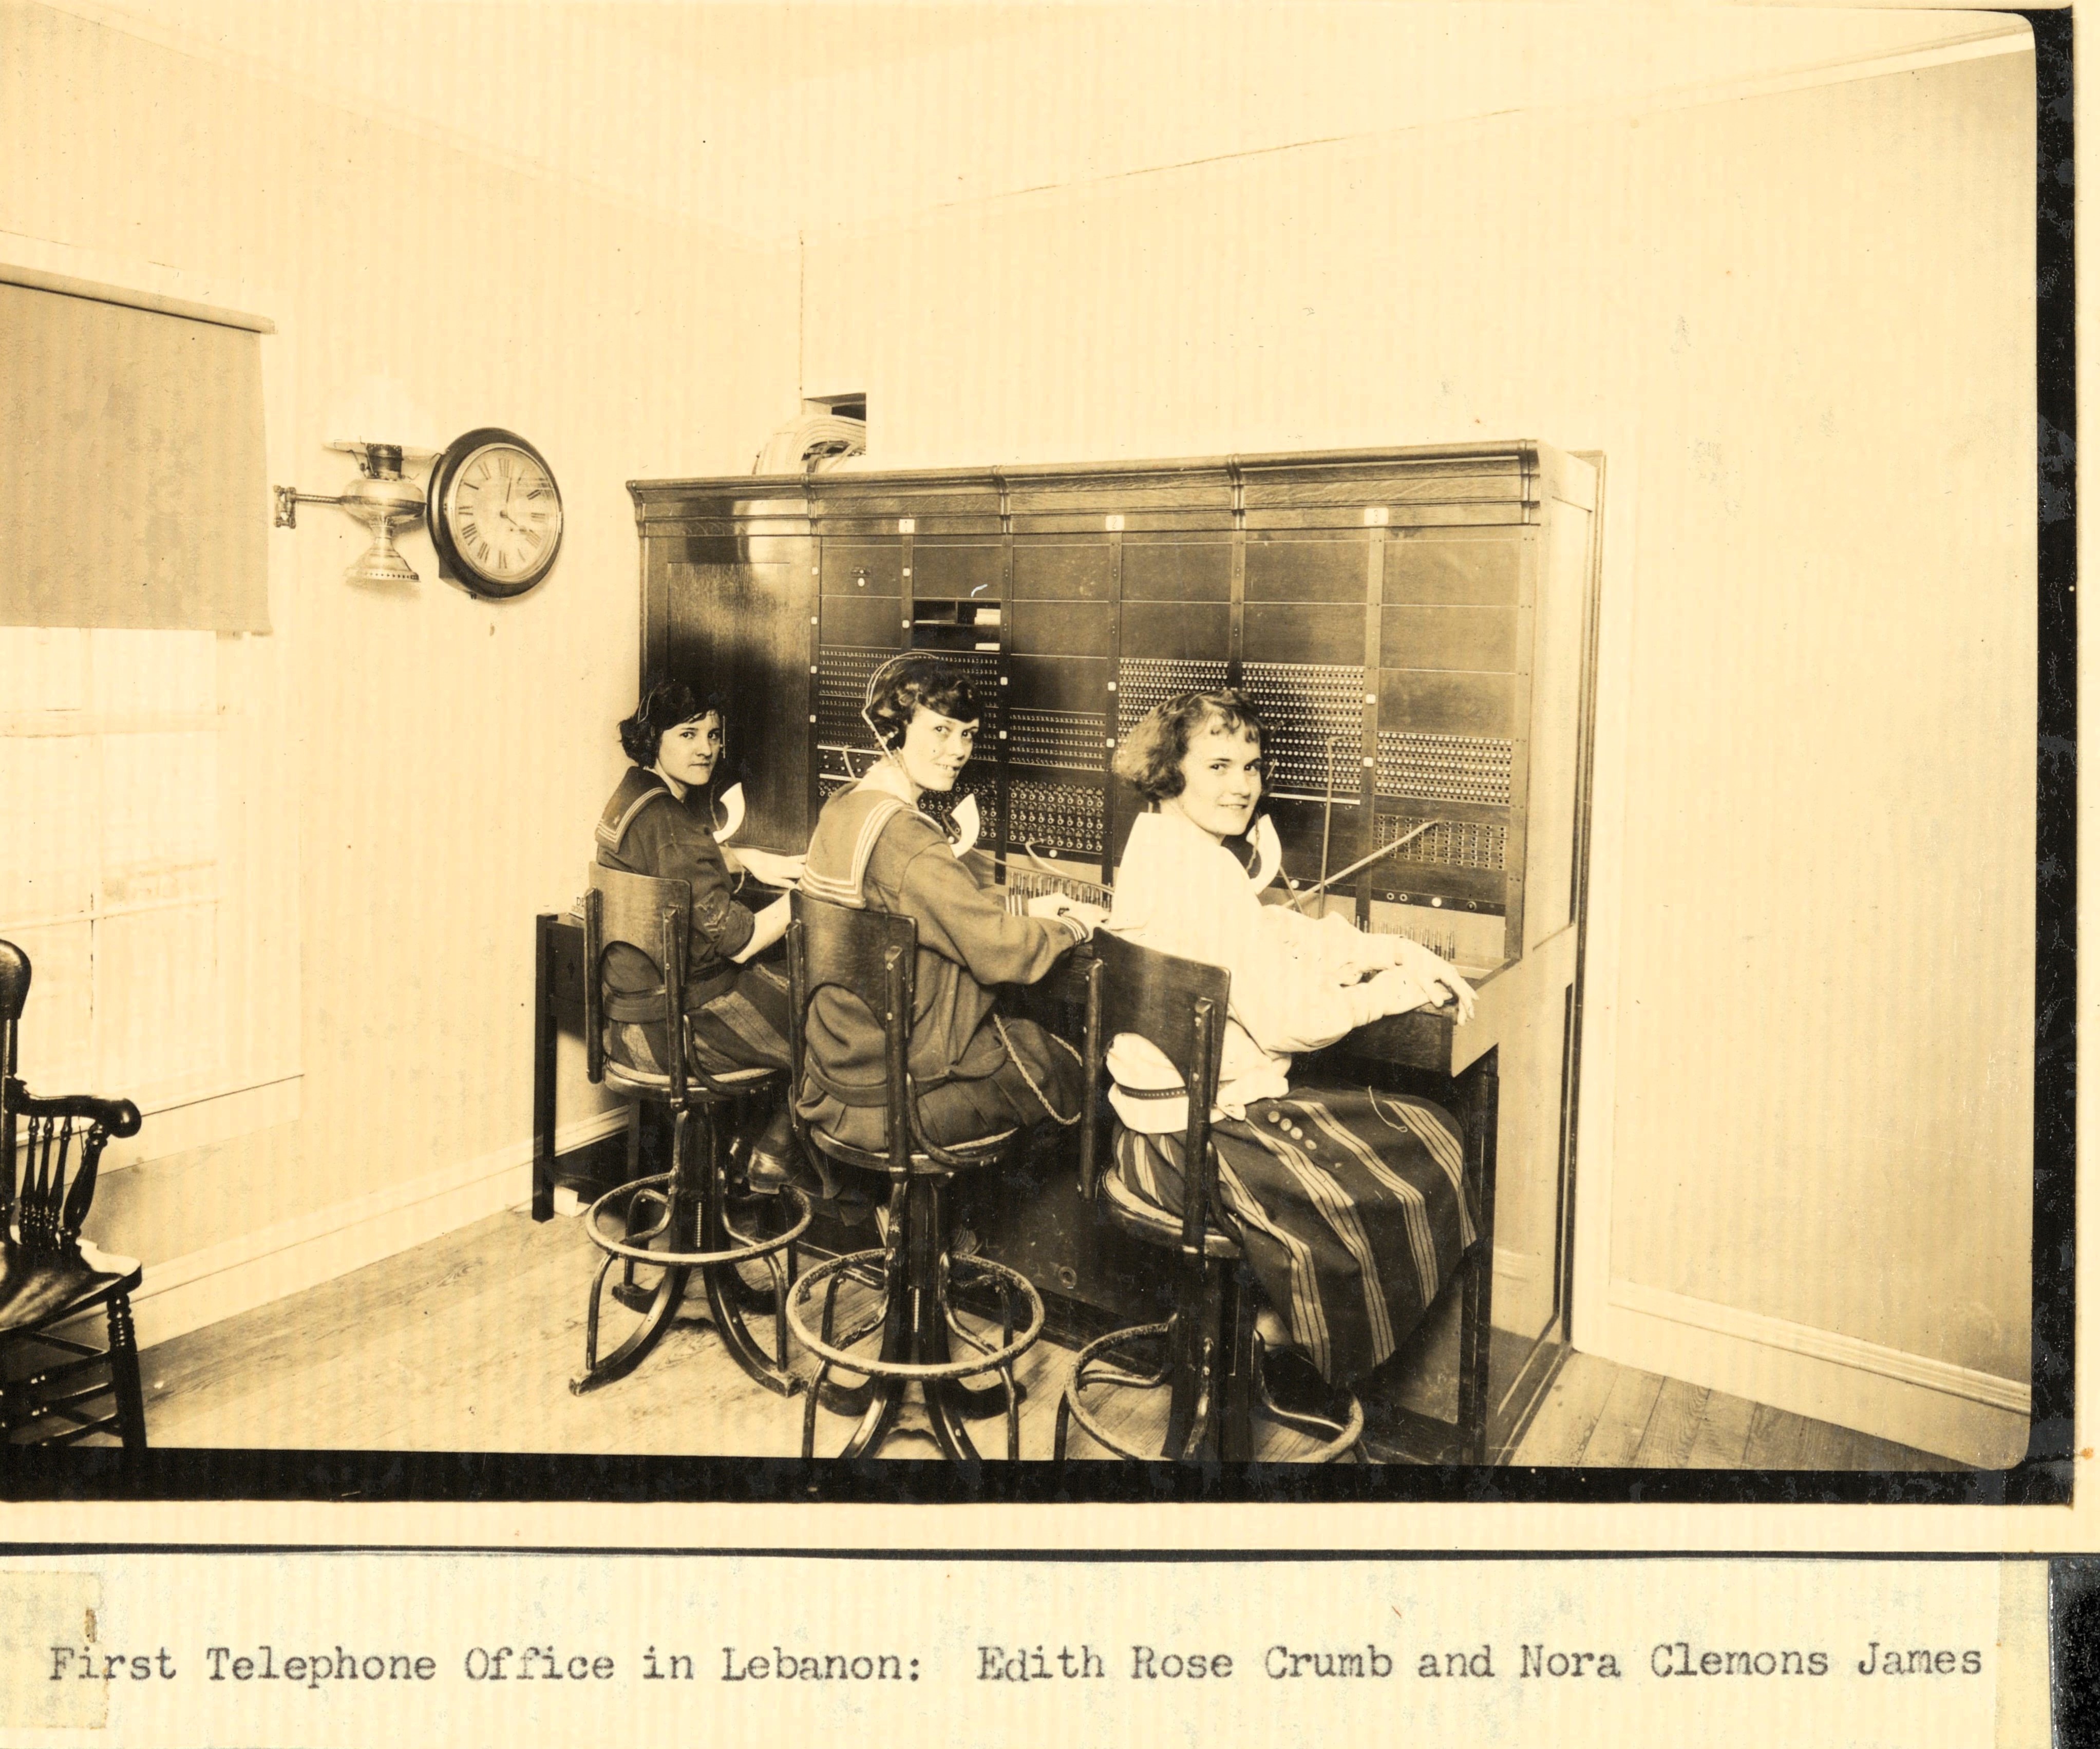 B1F32 First Telephone Office in Lebanon-Edith Rose Crumb and Nora Clemons James-Grace Manchester coll.jpg